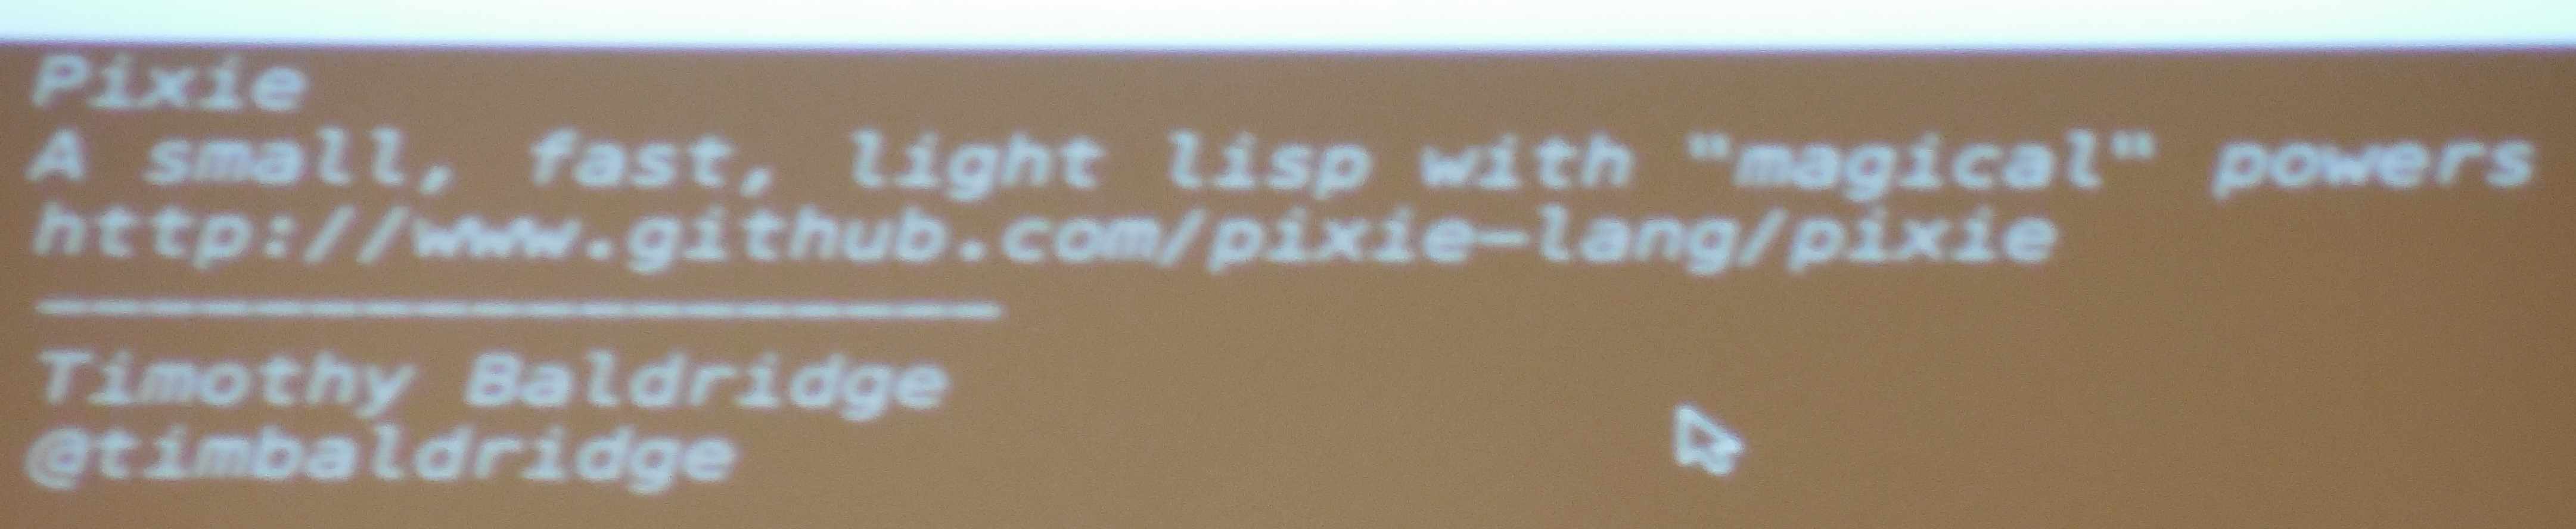 the opening screen for the Pixie talk